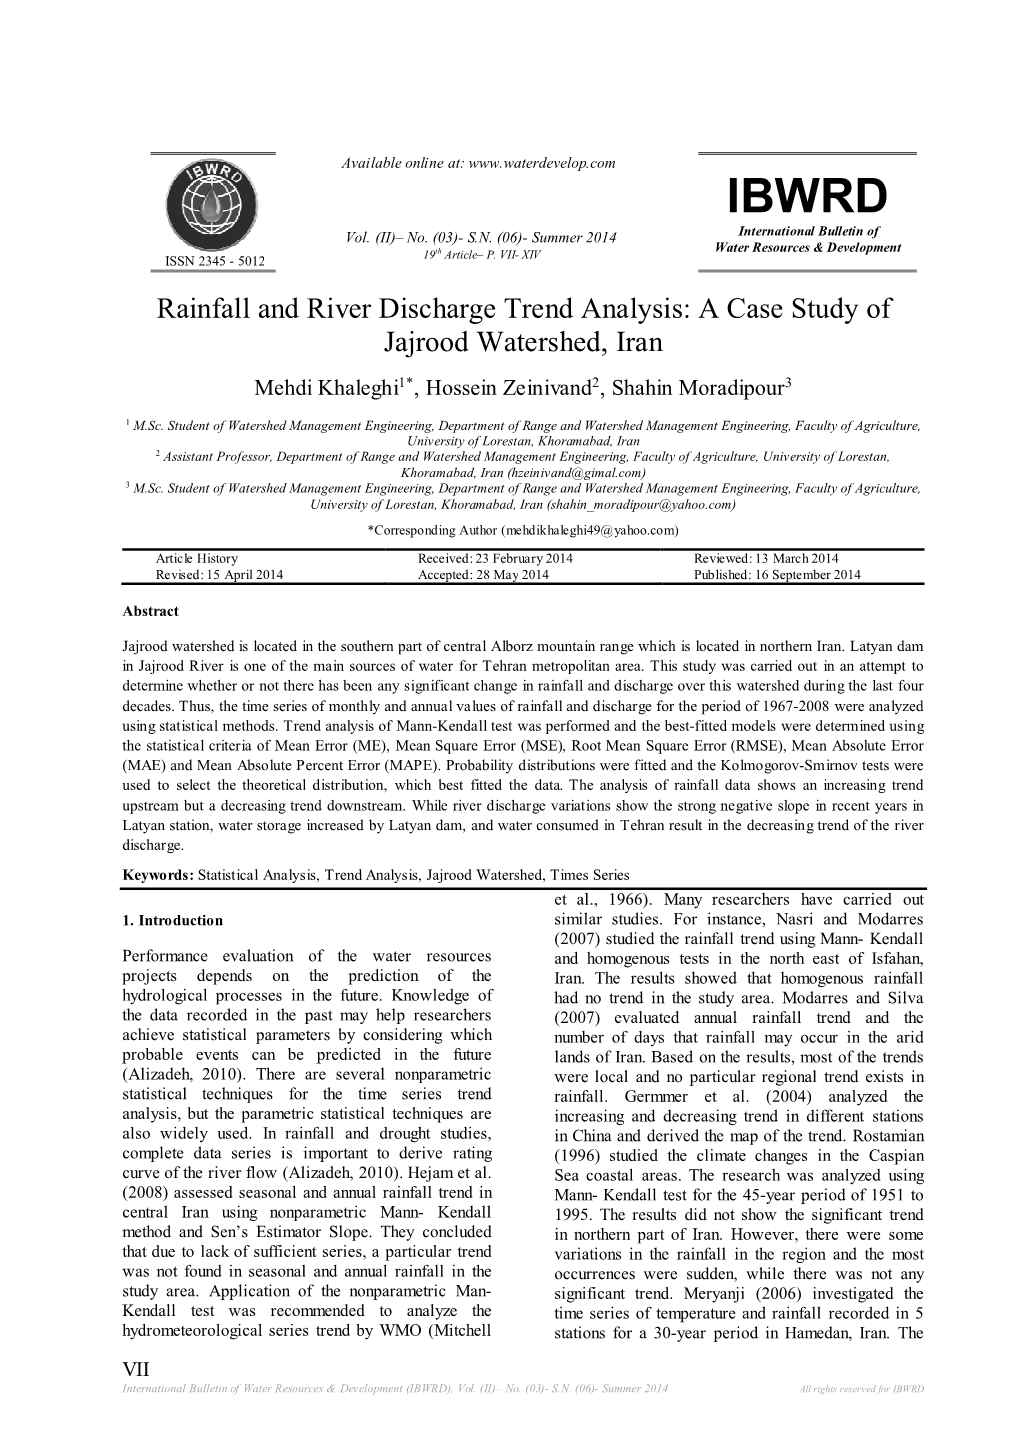 Rainfall and River Discharge Trend Analysis: a Case Study of Jajrood Watershed, Iran Mehdi Khaleghi 1* , Hossein Zeinivand 2, Shahin Moradipour 3